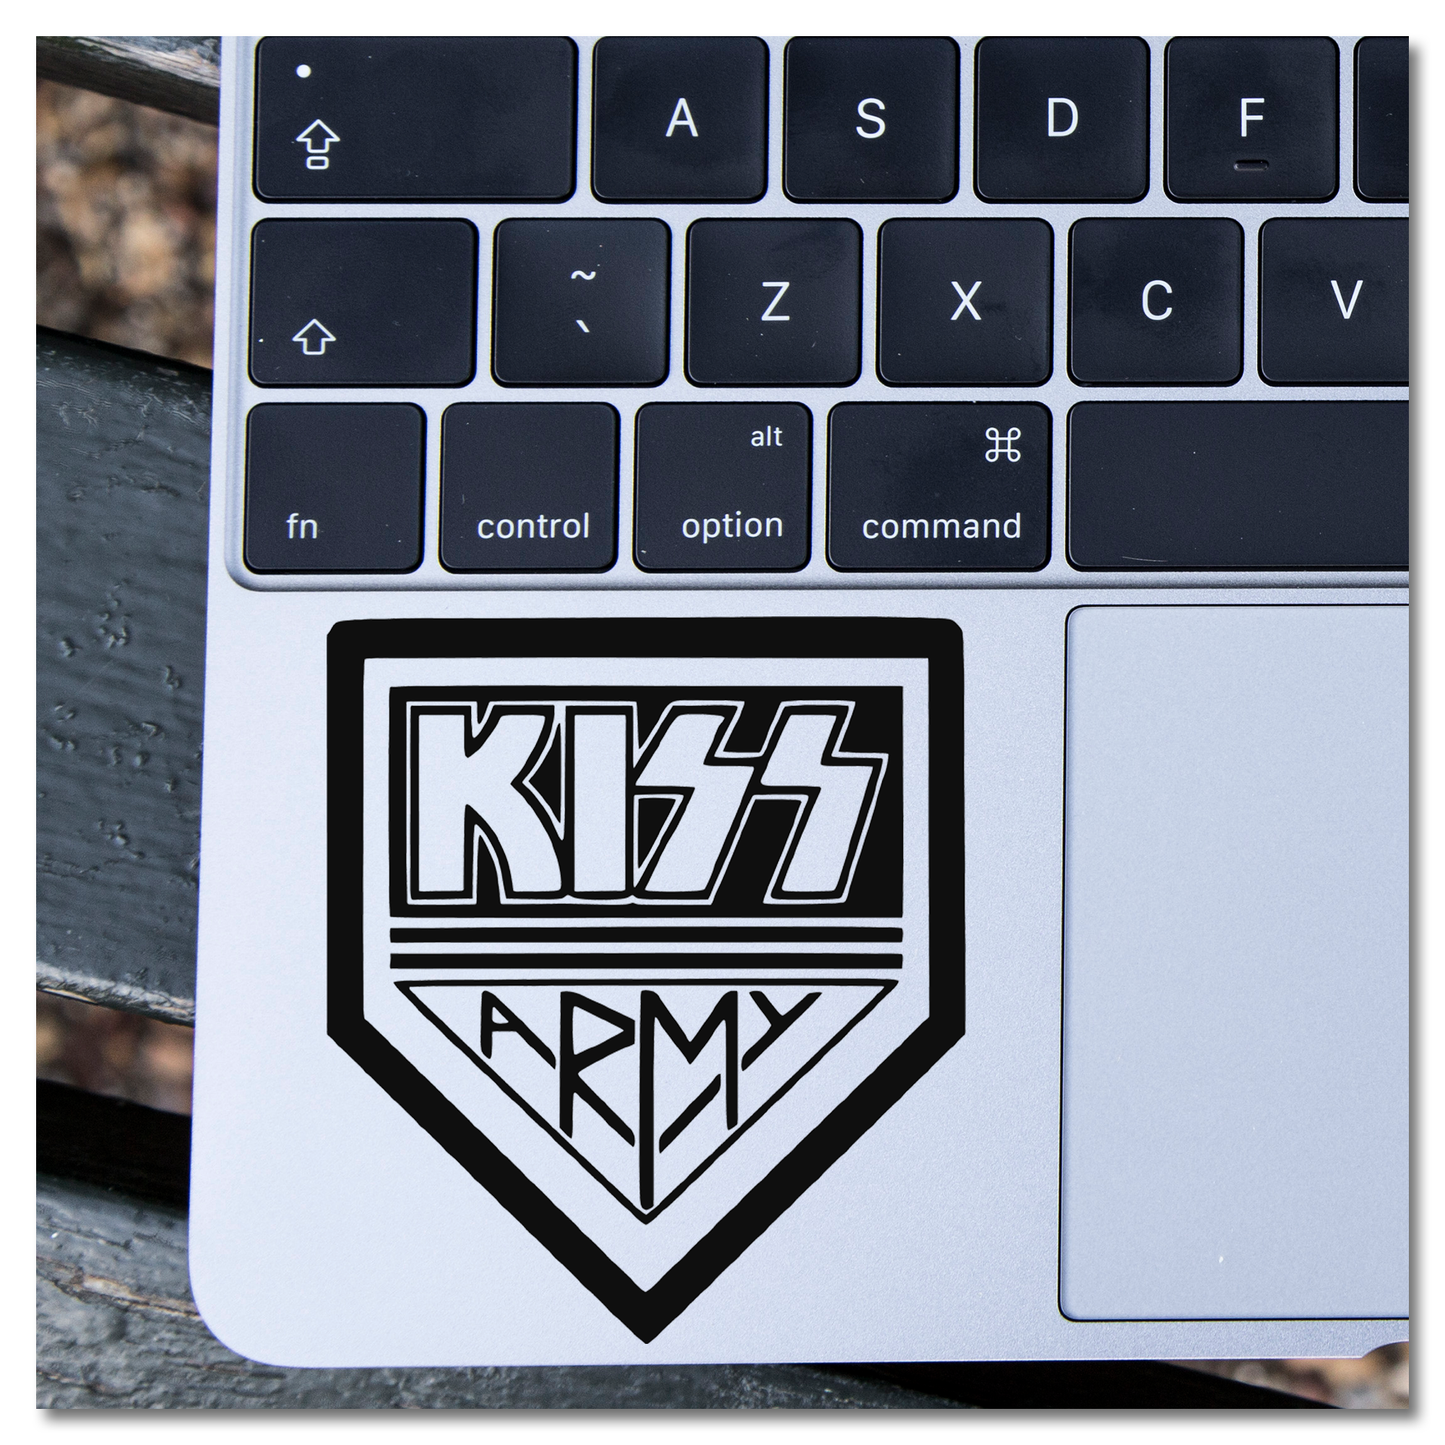 KISS Army Patch Vinyl Decal Sticker